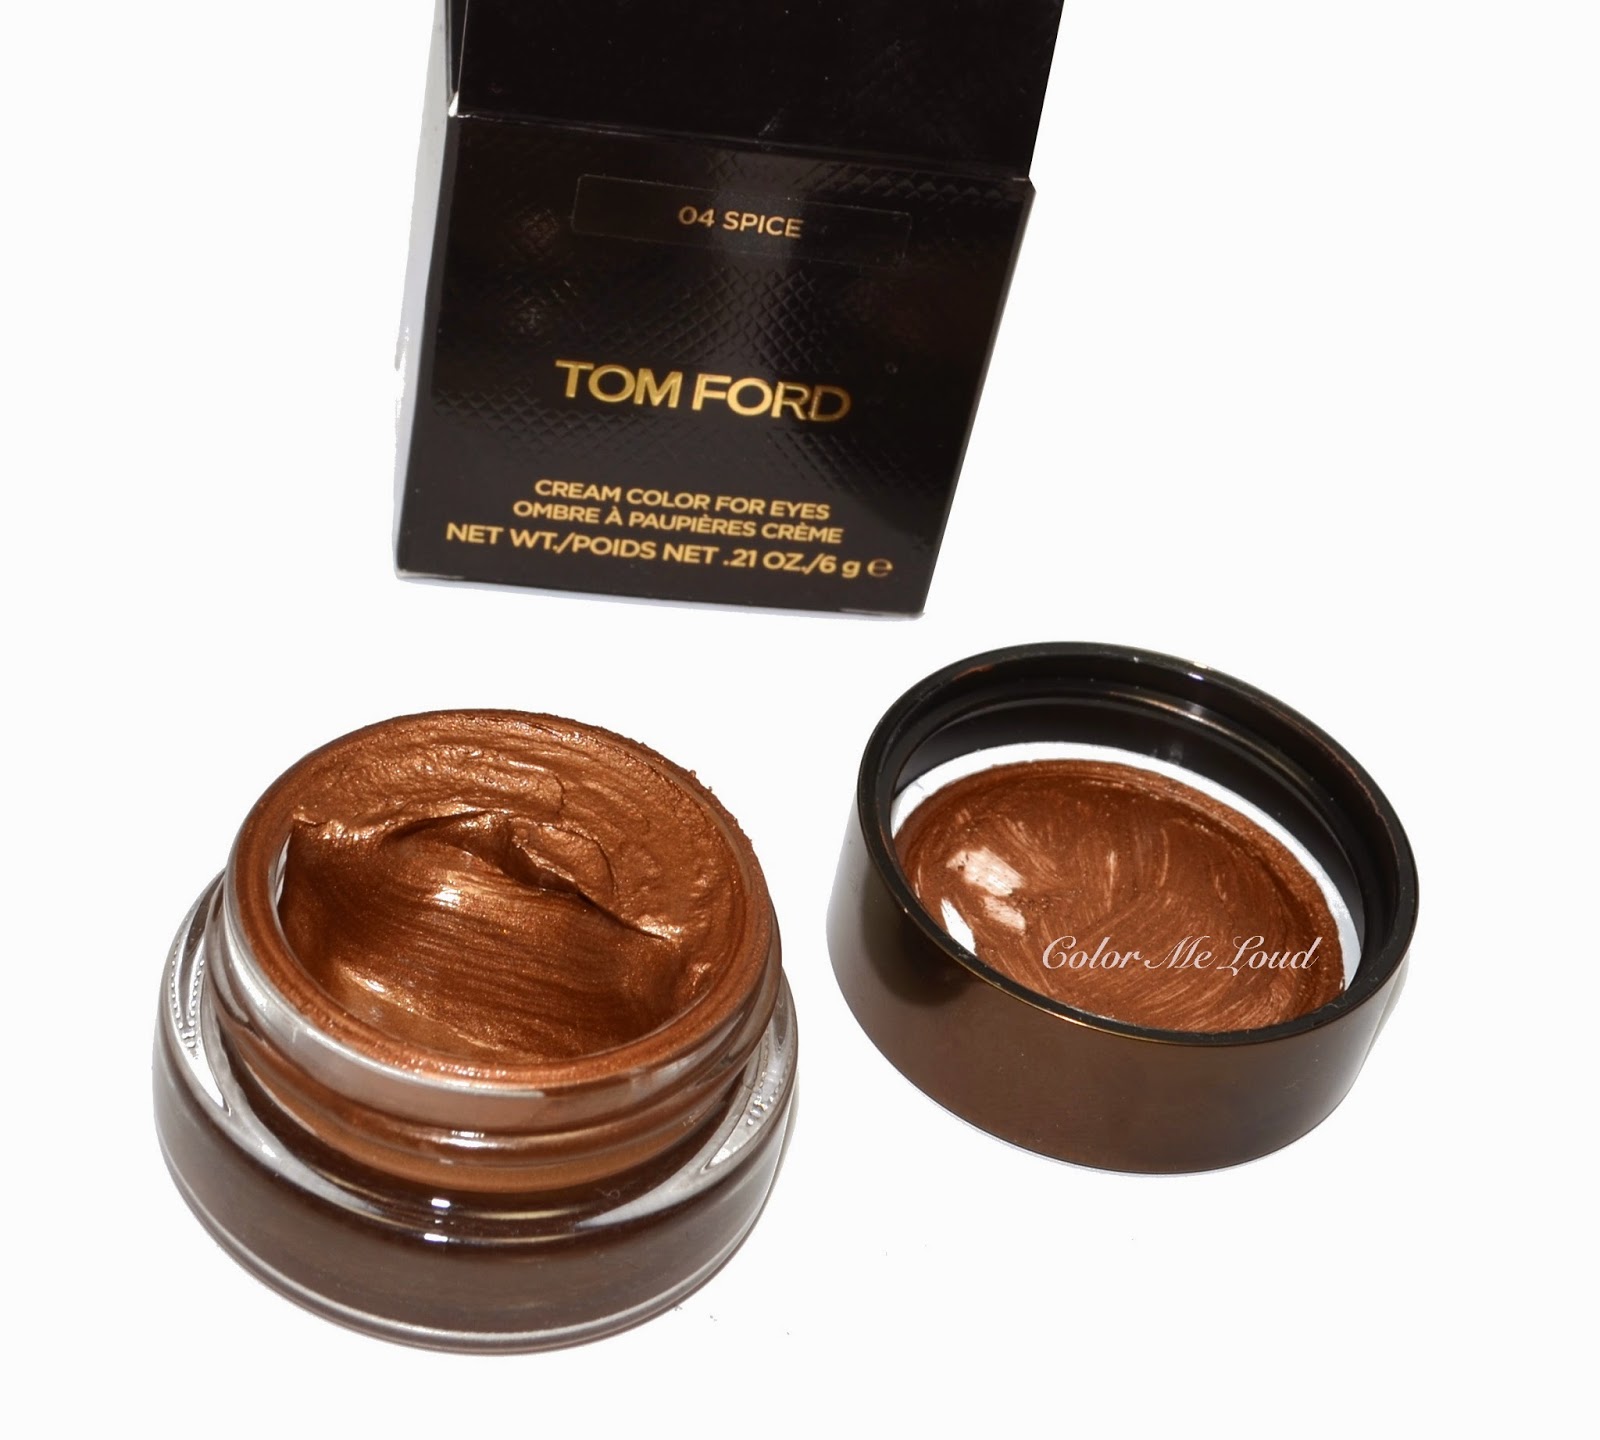 Caught in Action: Tom Ford Cream Color in Spice, MAC Mineralize Rich Lipstick in Touch the Earth (from Lightness of Being), Review, Swatch & Comparison 